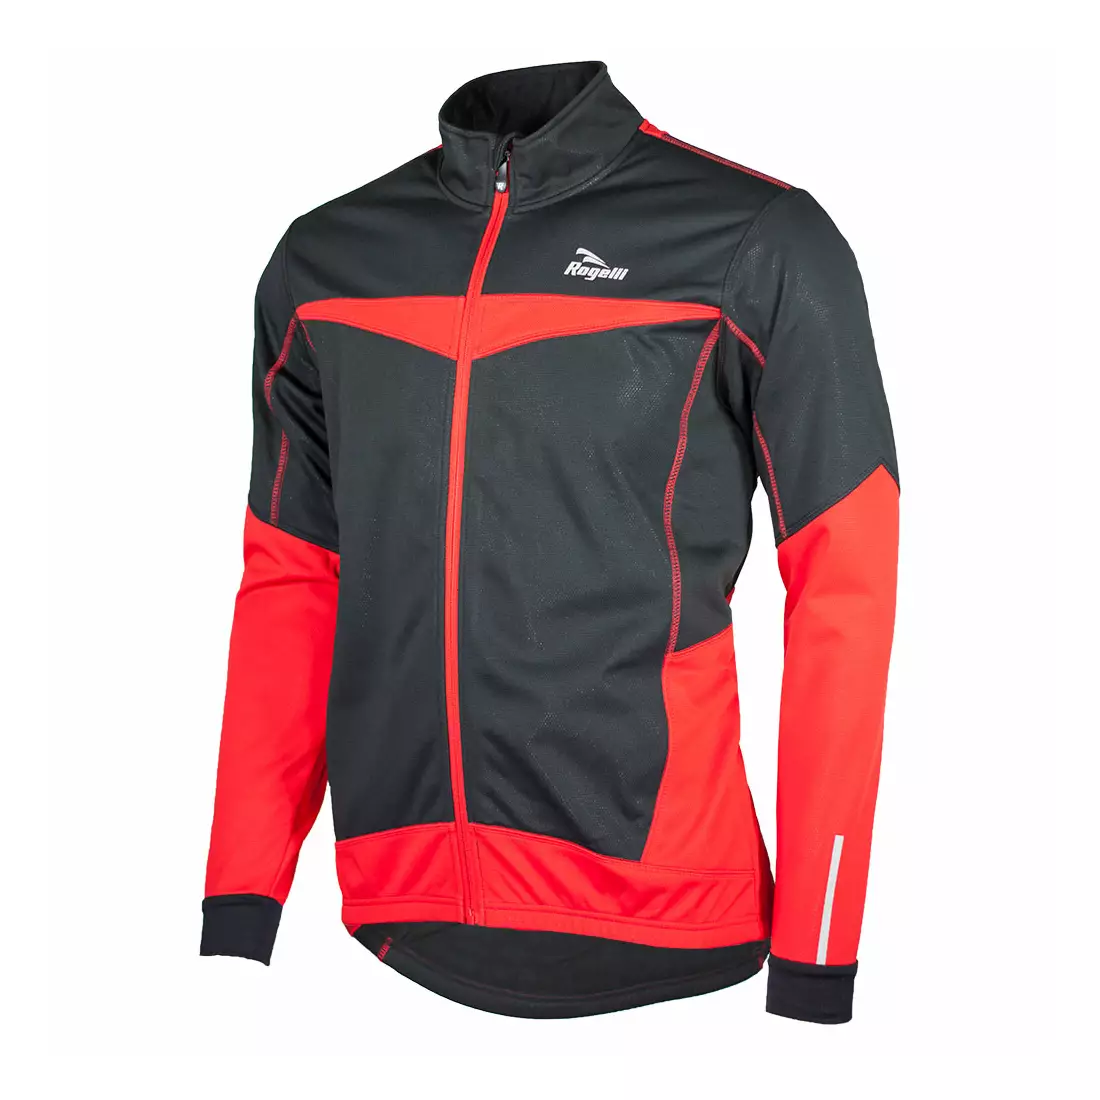 ROGELLI UBALDO insulated cycling jacket with a red membrane